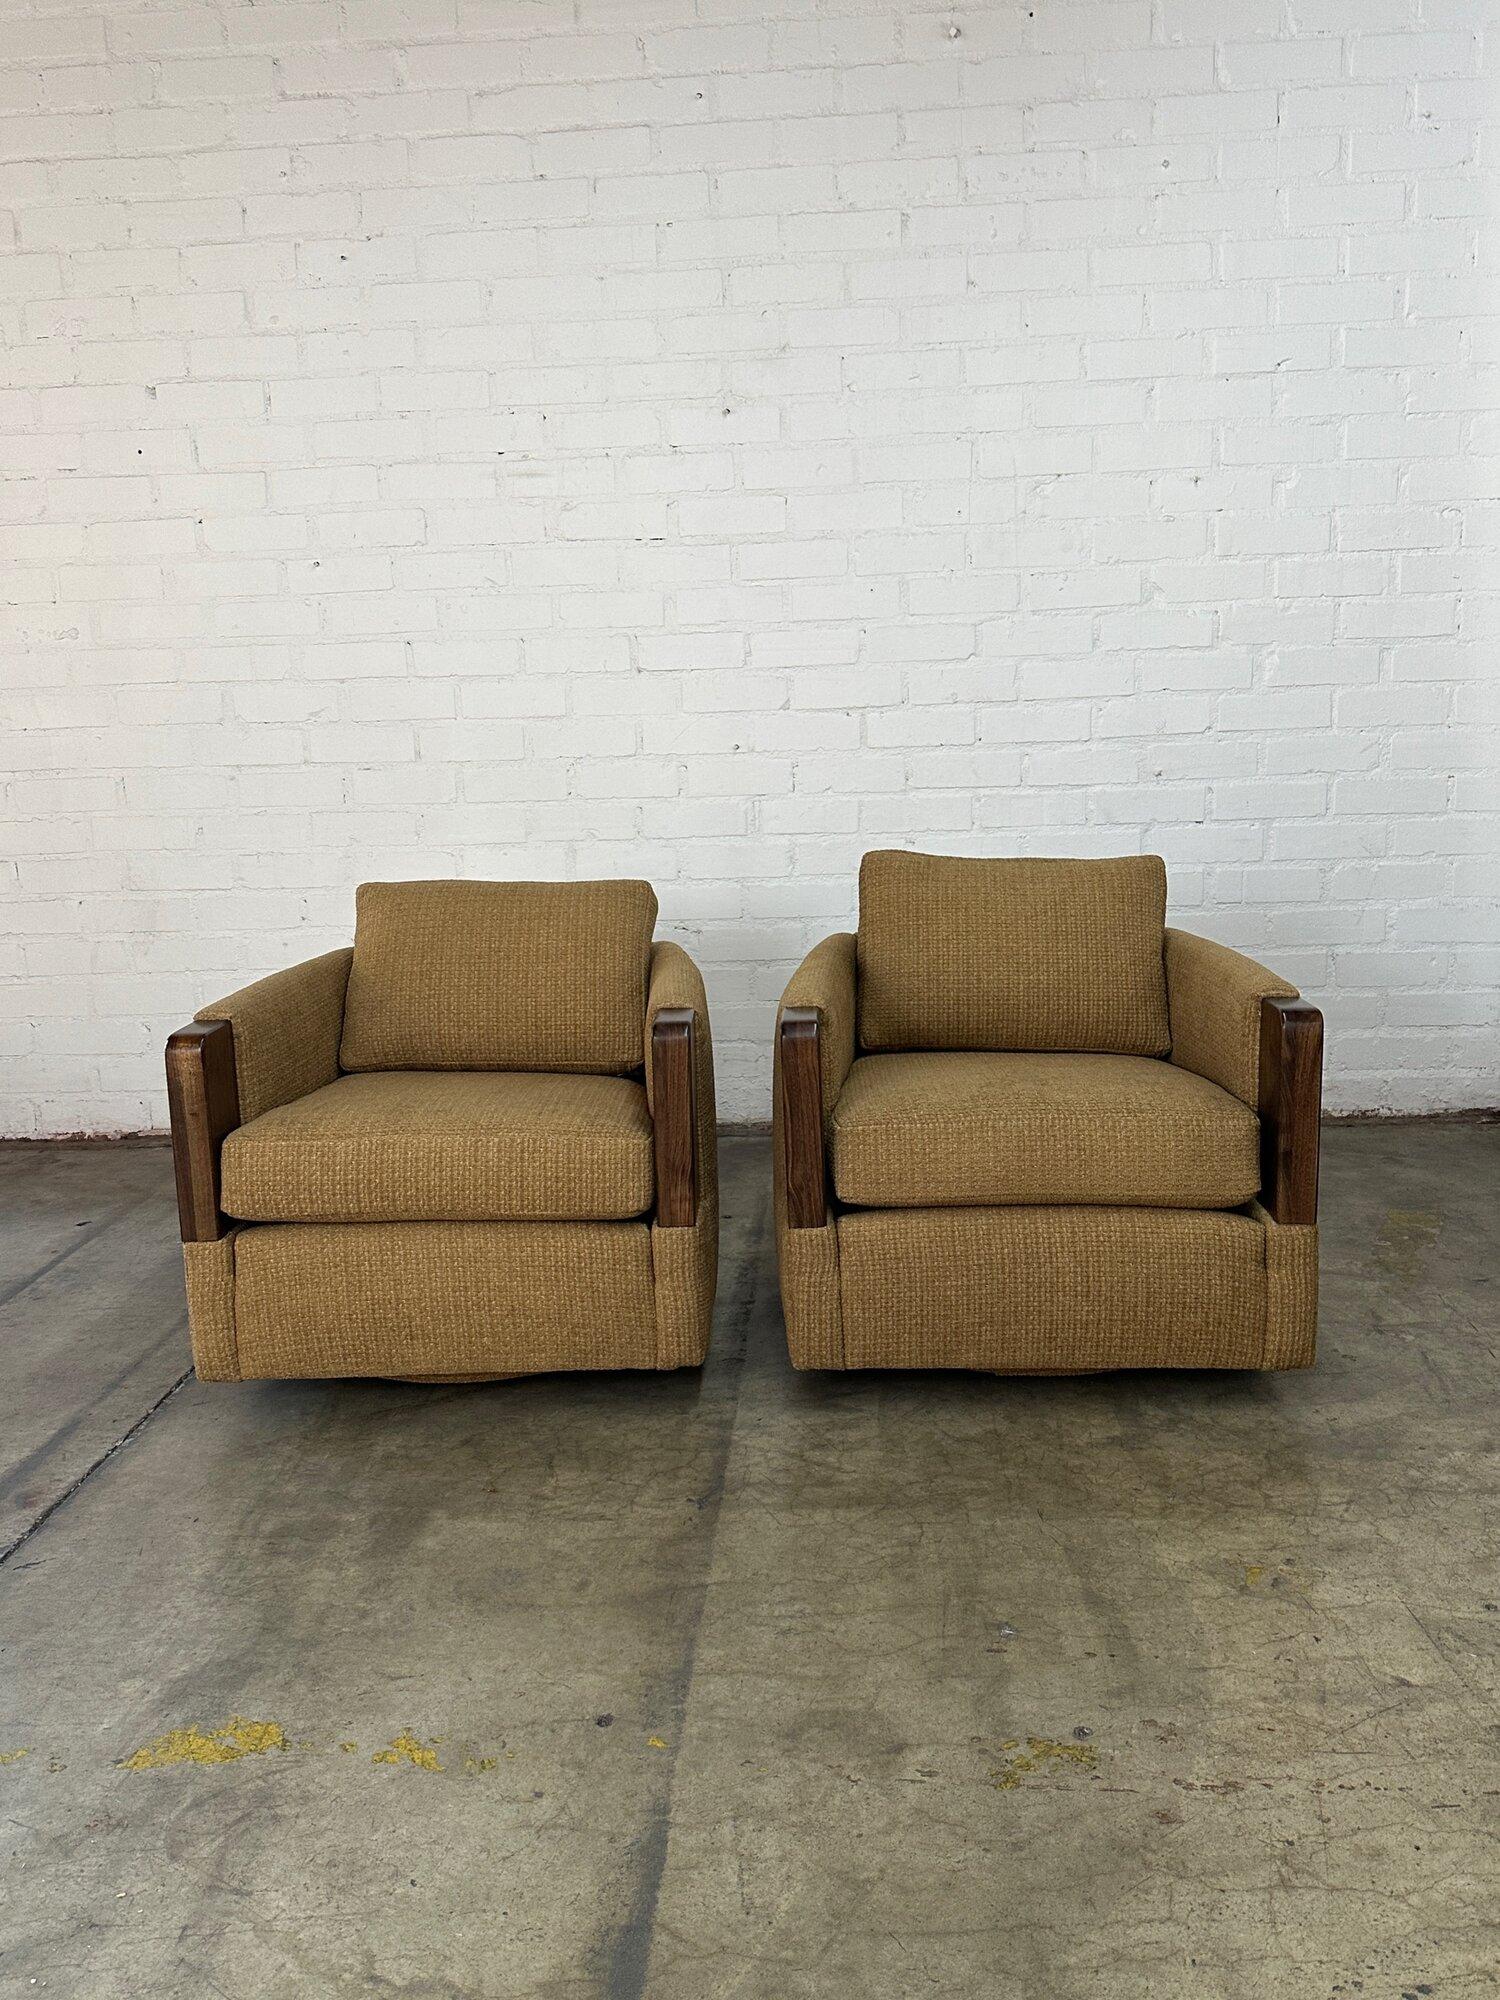 W30.5 D32 H30 SW25 SD19 SH18 AH24

Rare vintage lounge chairs custom made circa 1970s-80s. These 1 of 1 lounge chairs lounge feature fresh waffle knit tweed. Each Lounge chair features solid walnut built ins that serve to complete arm rests. Solid